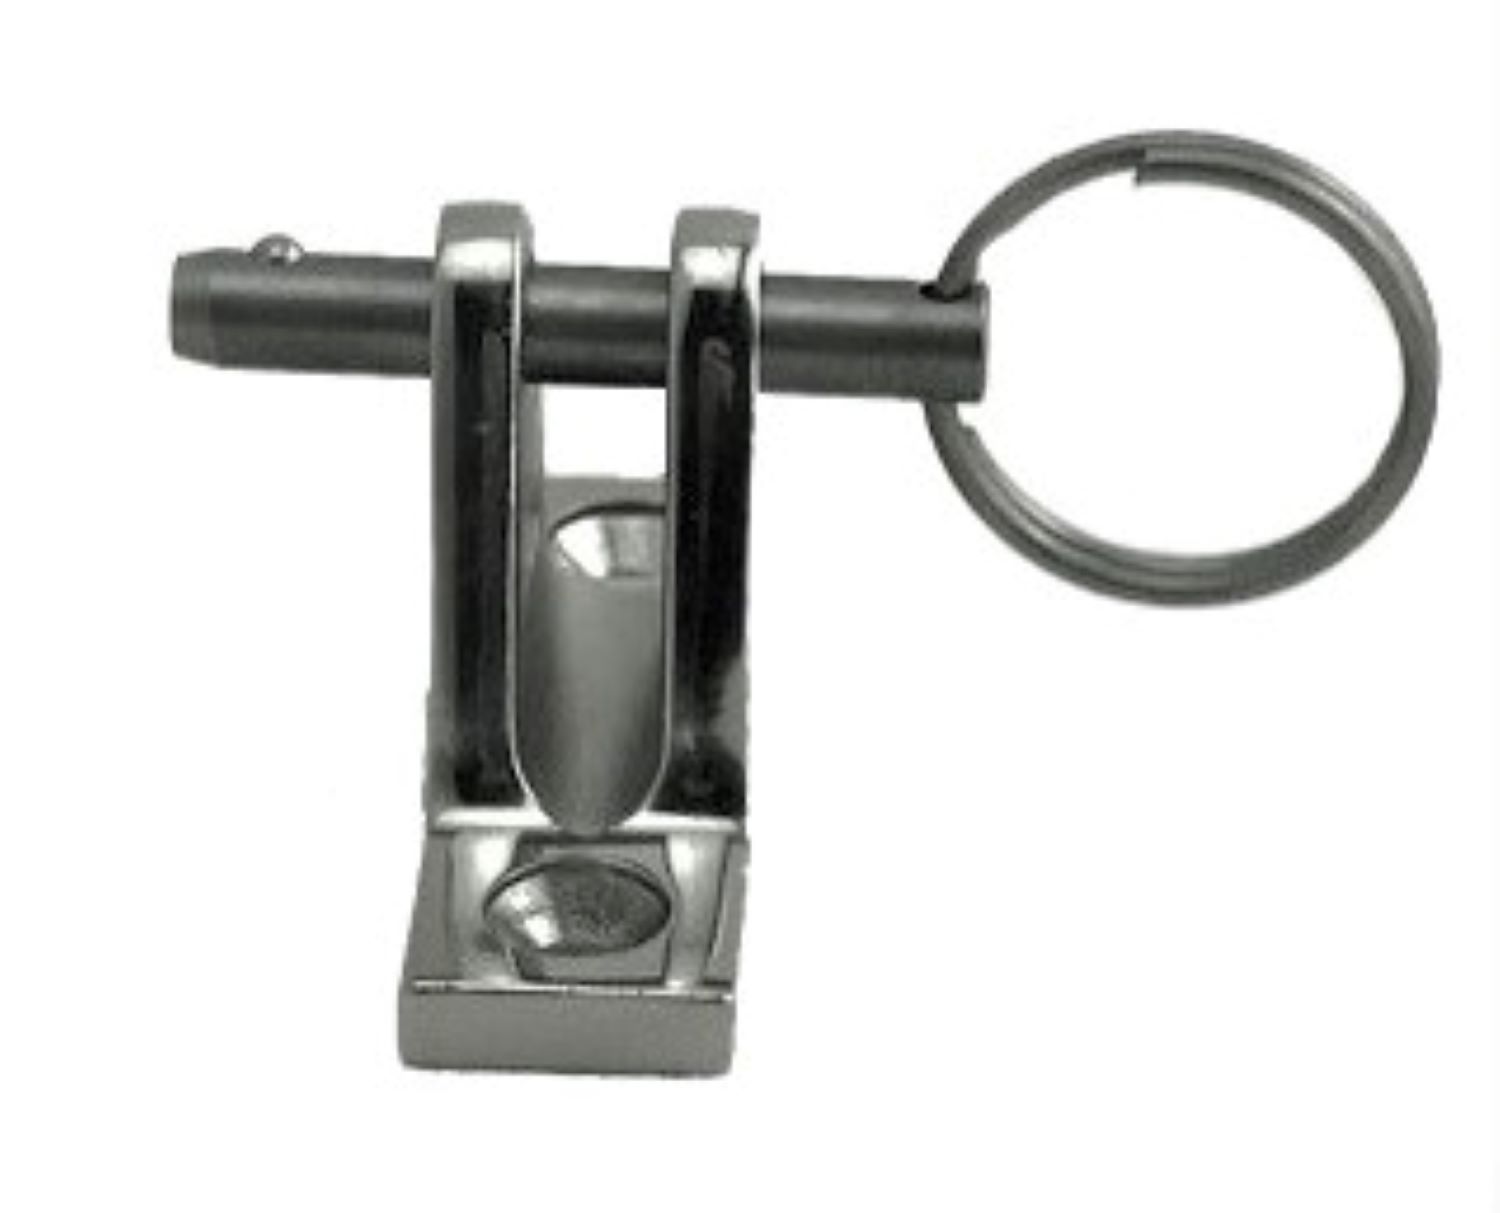 Stainless Steel Deck hinge with pin